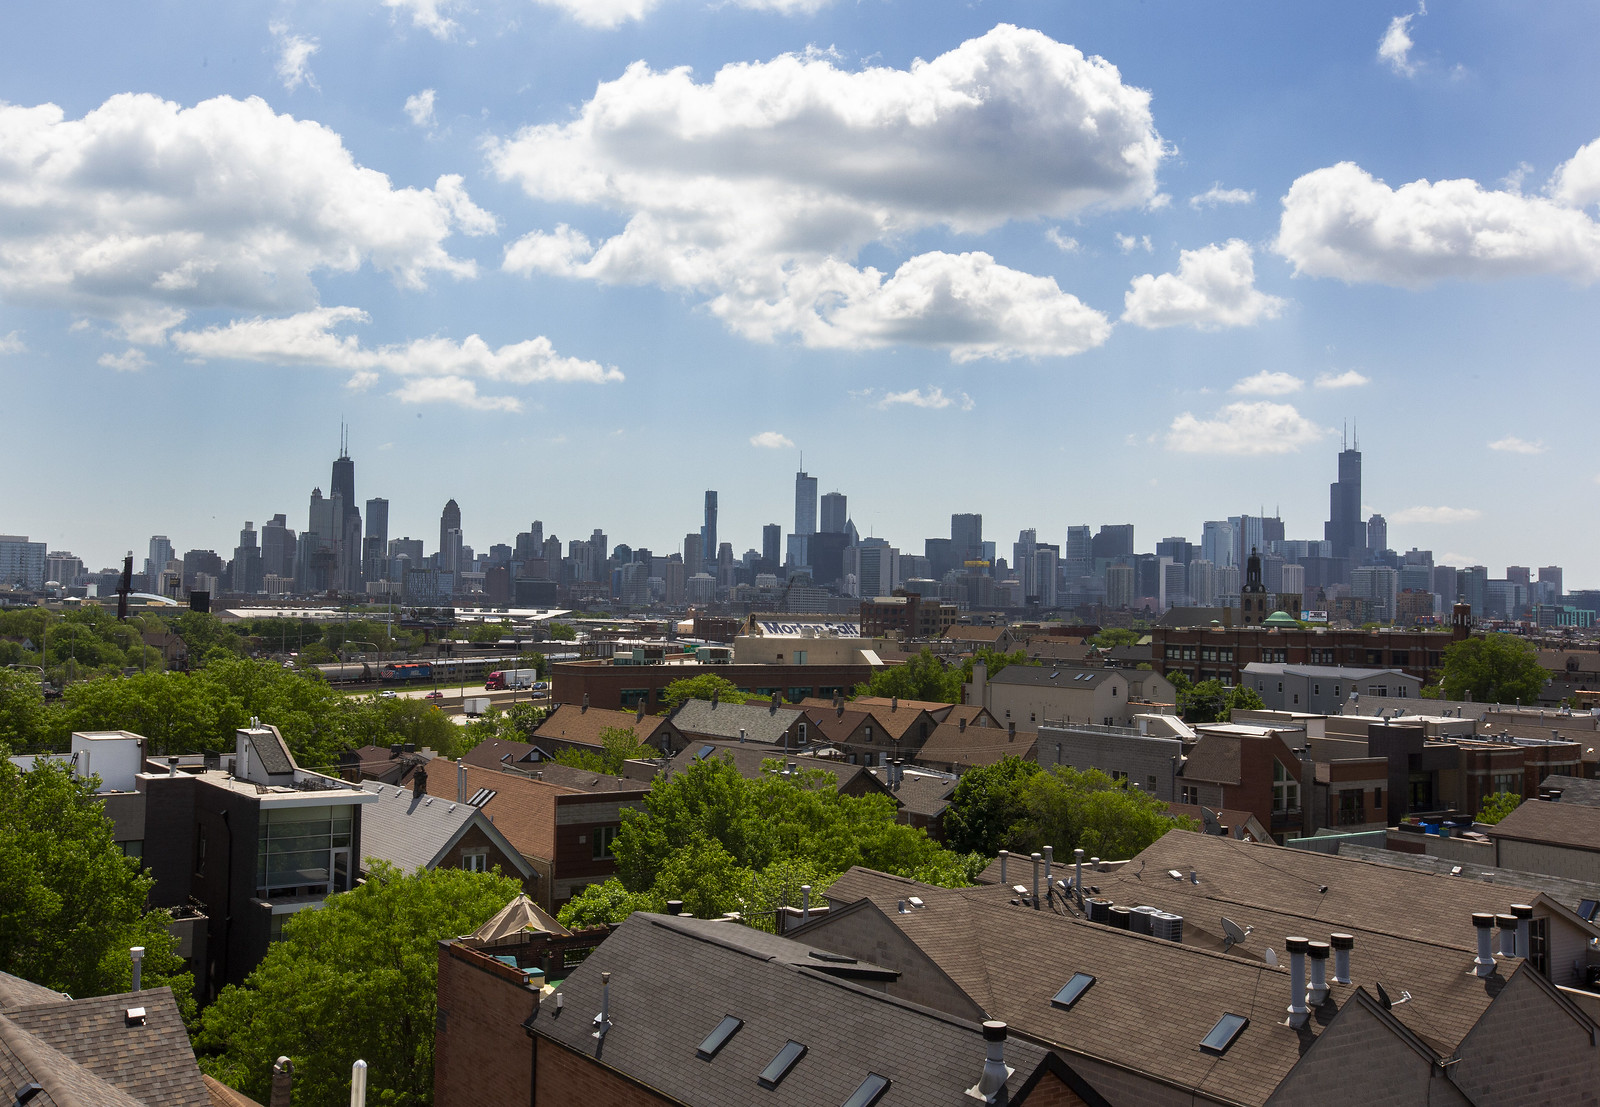 An aerial view of rooftops with the Chicago skyline in the distance.